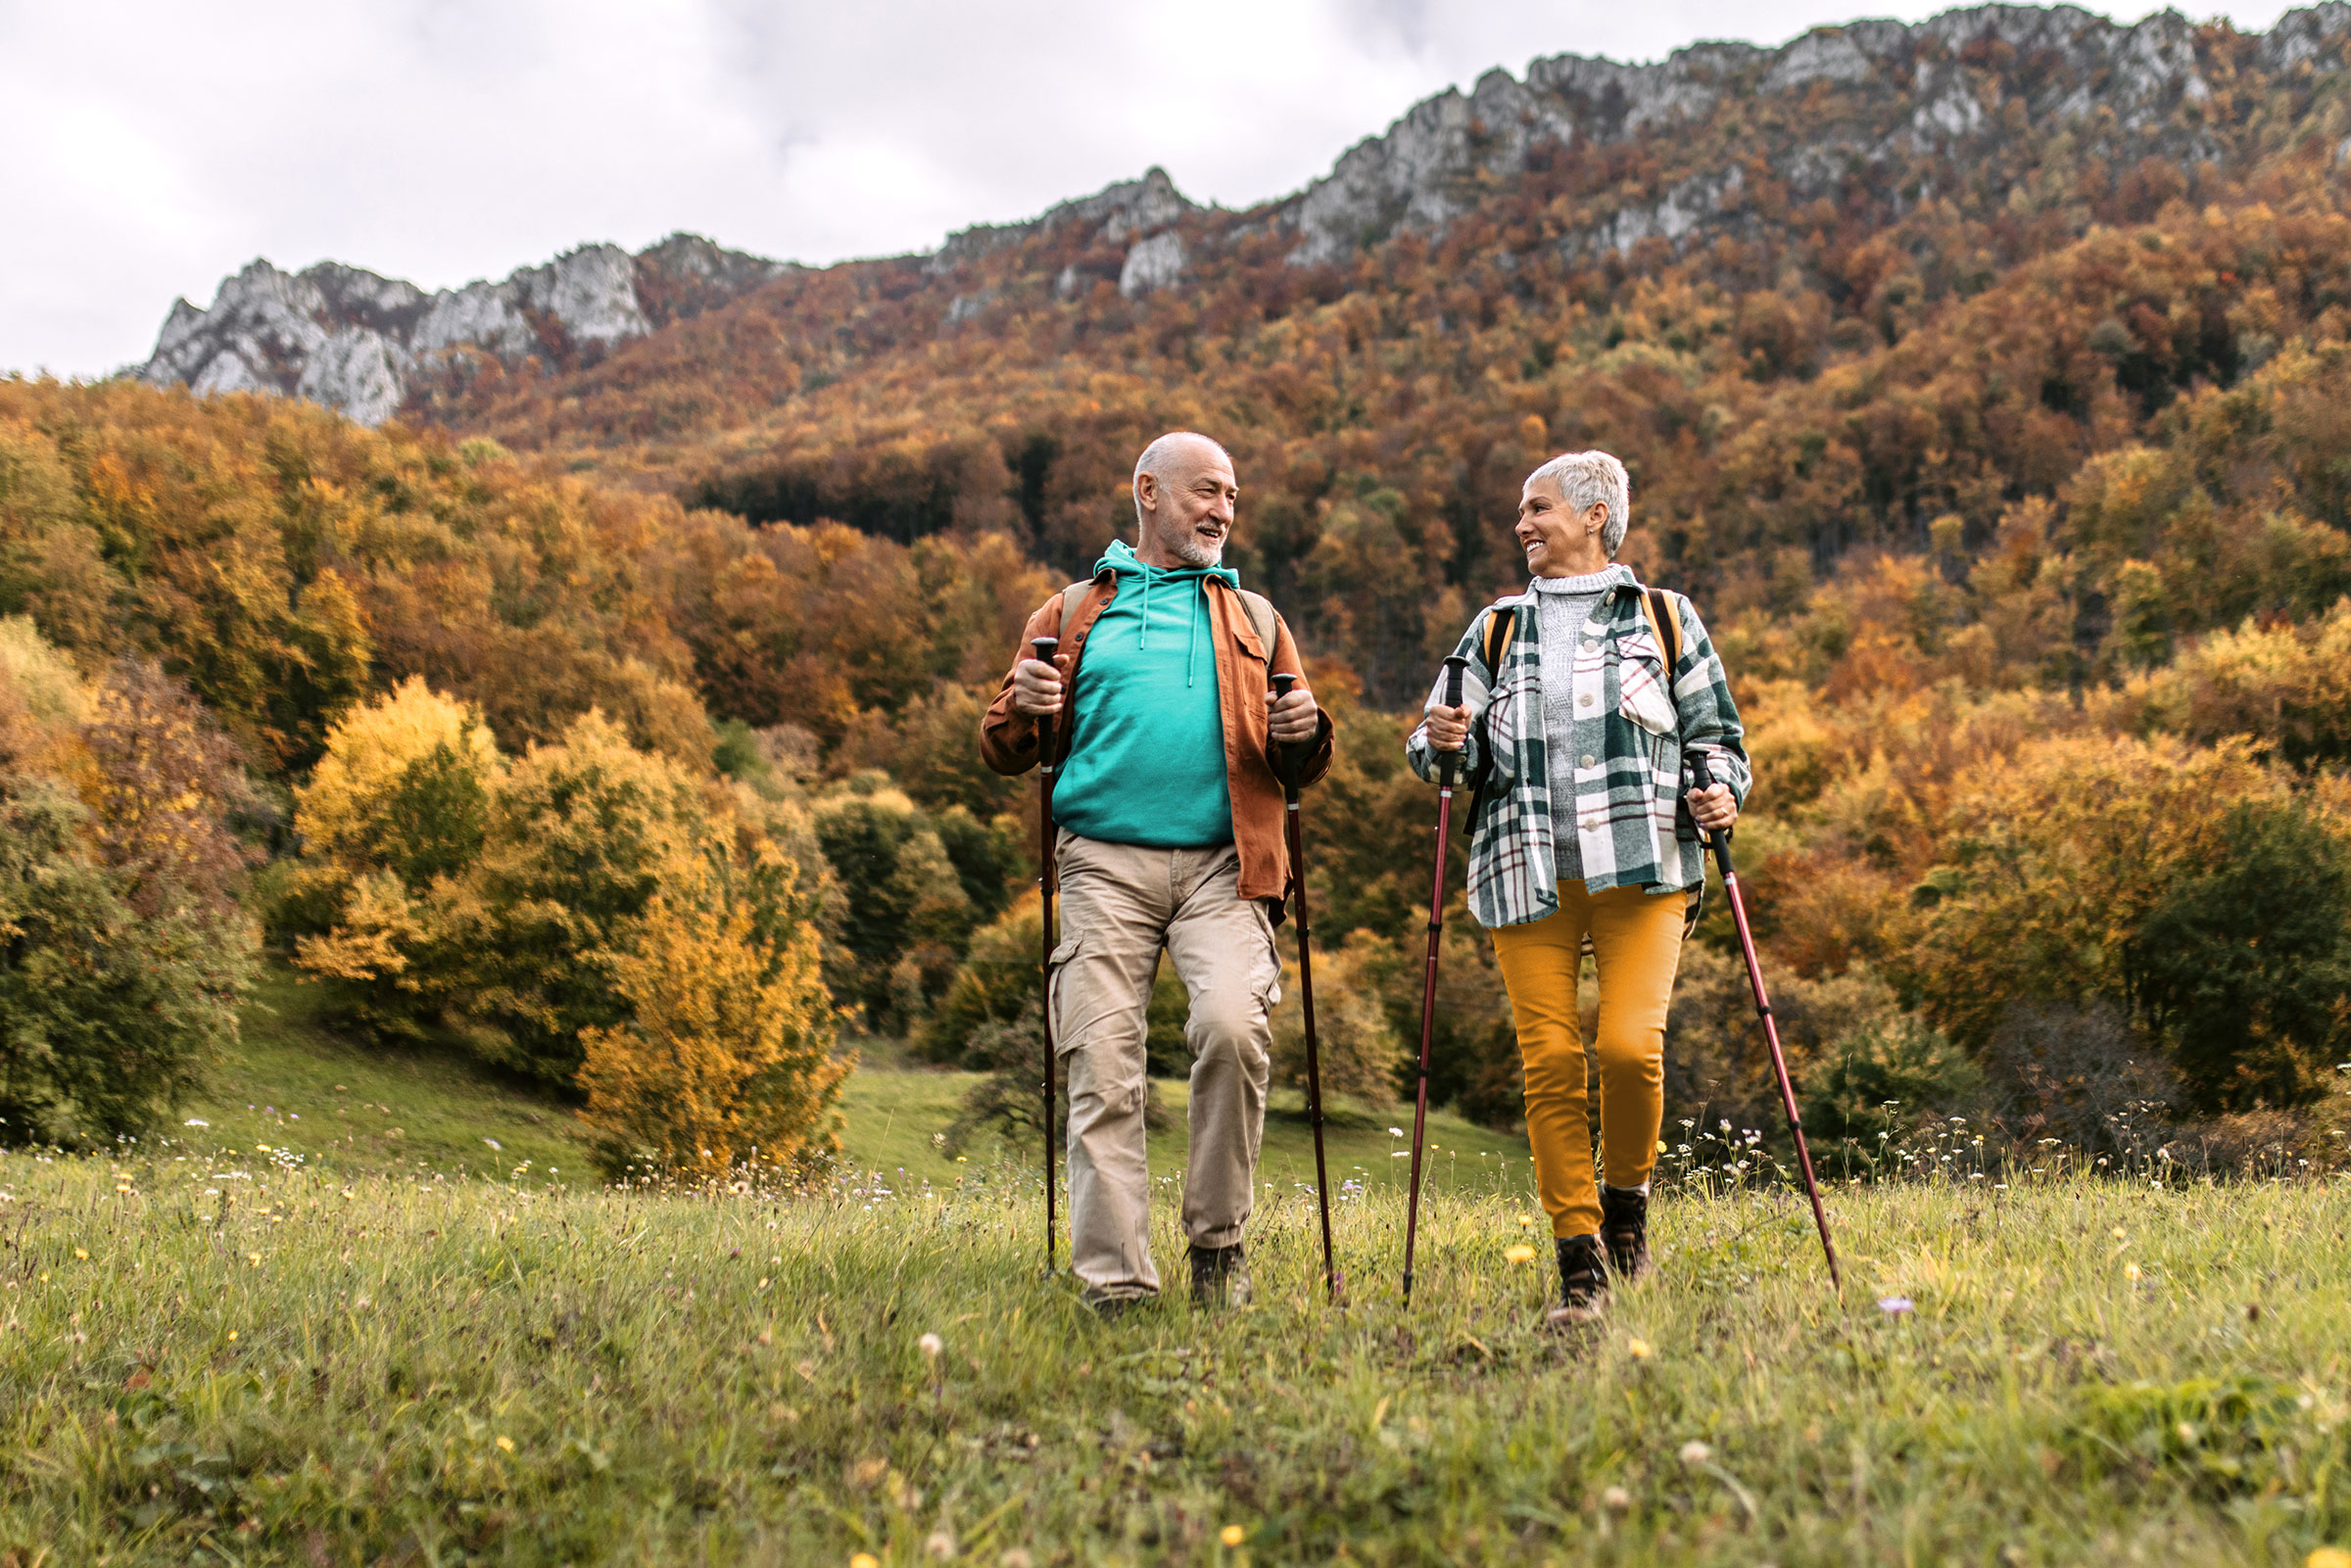 A retired couple hike with walking poles through a grassy field. Behind them is a mountain range and trees covered in fall leaves.